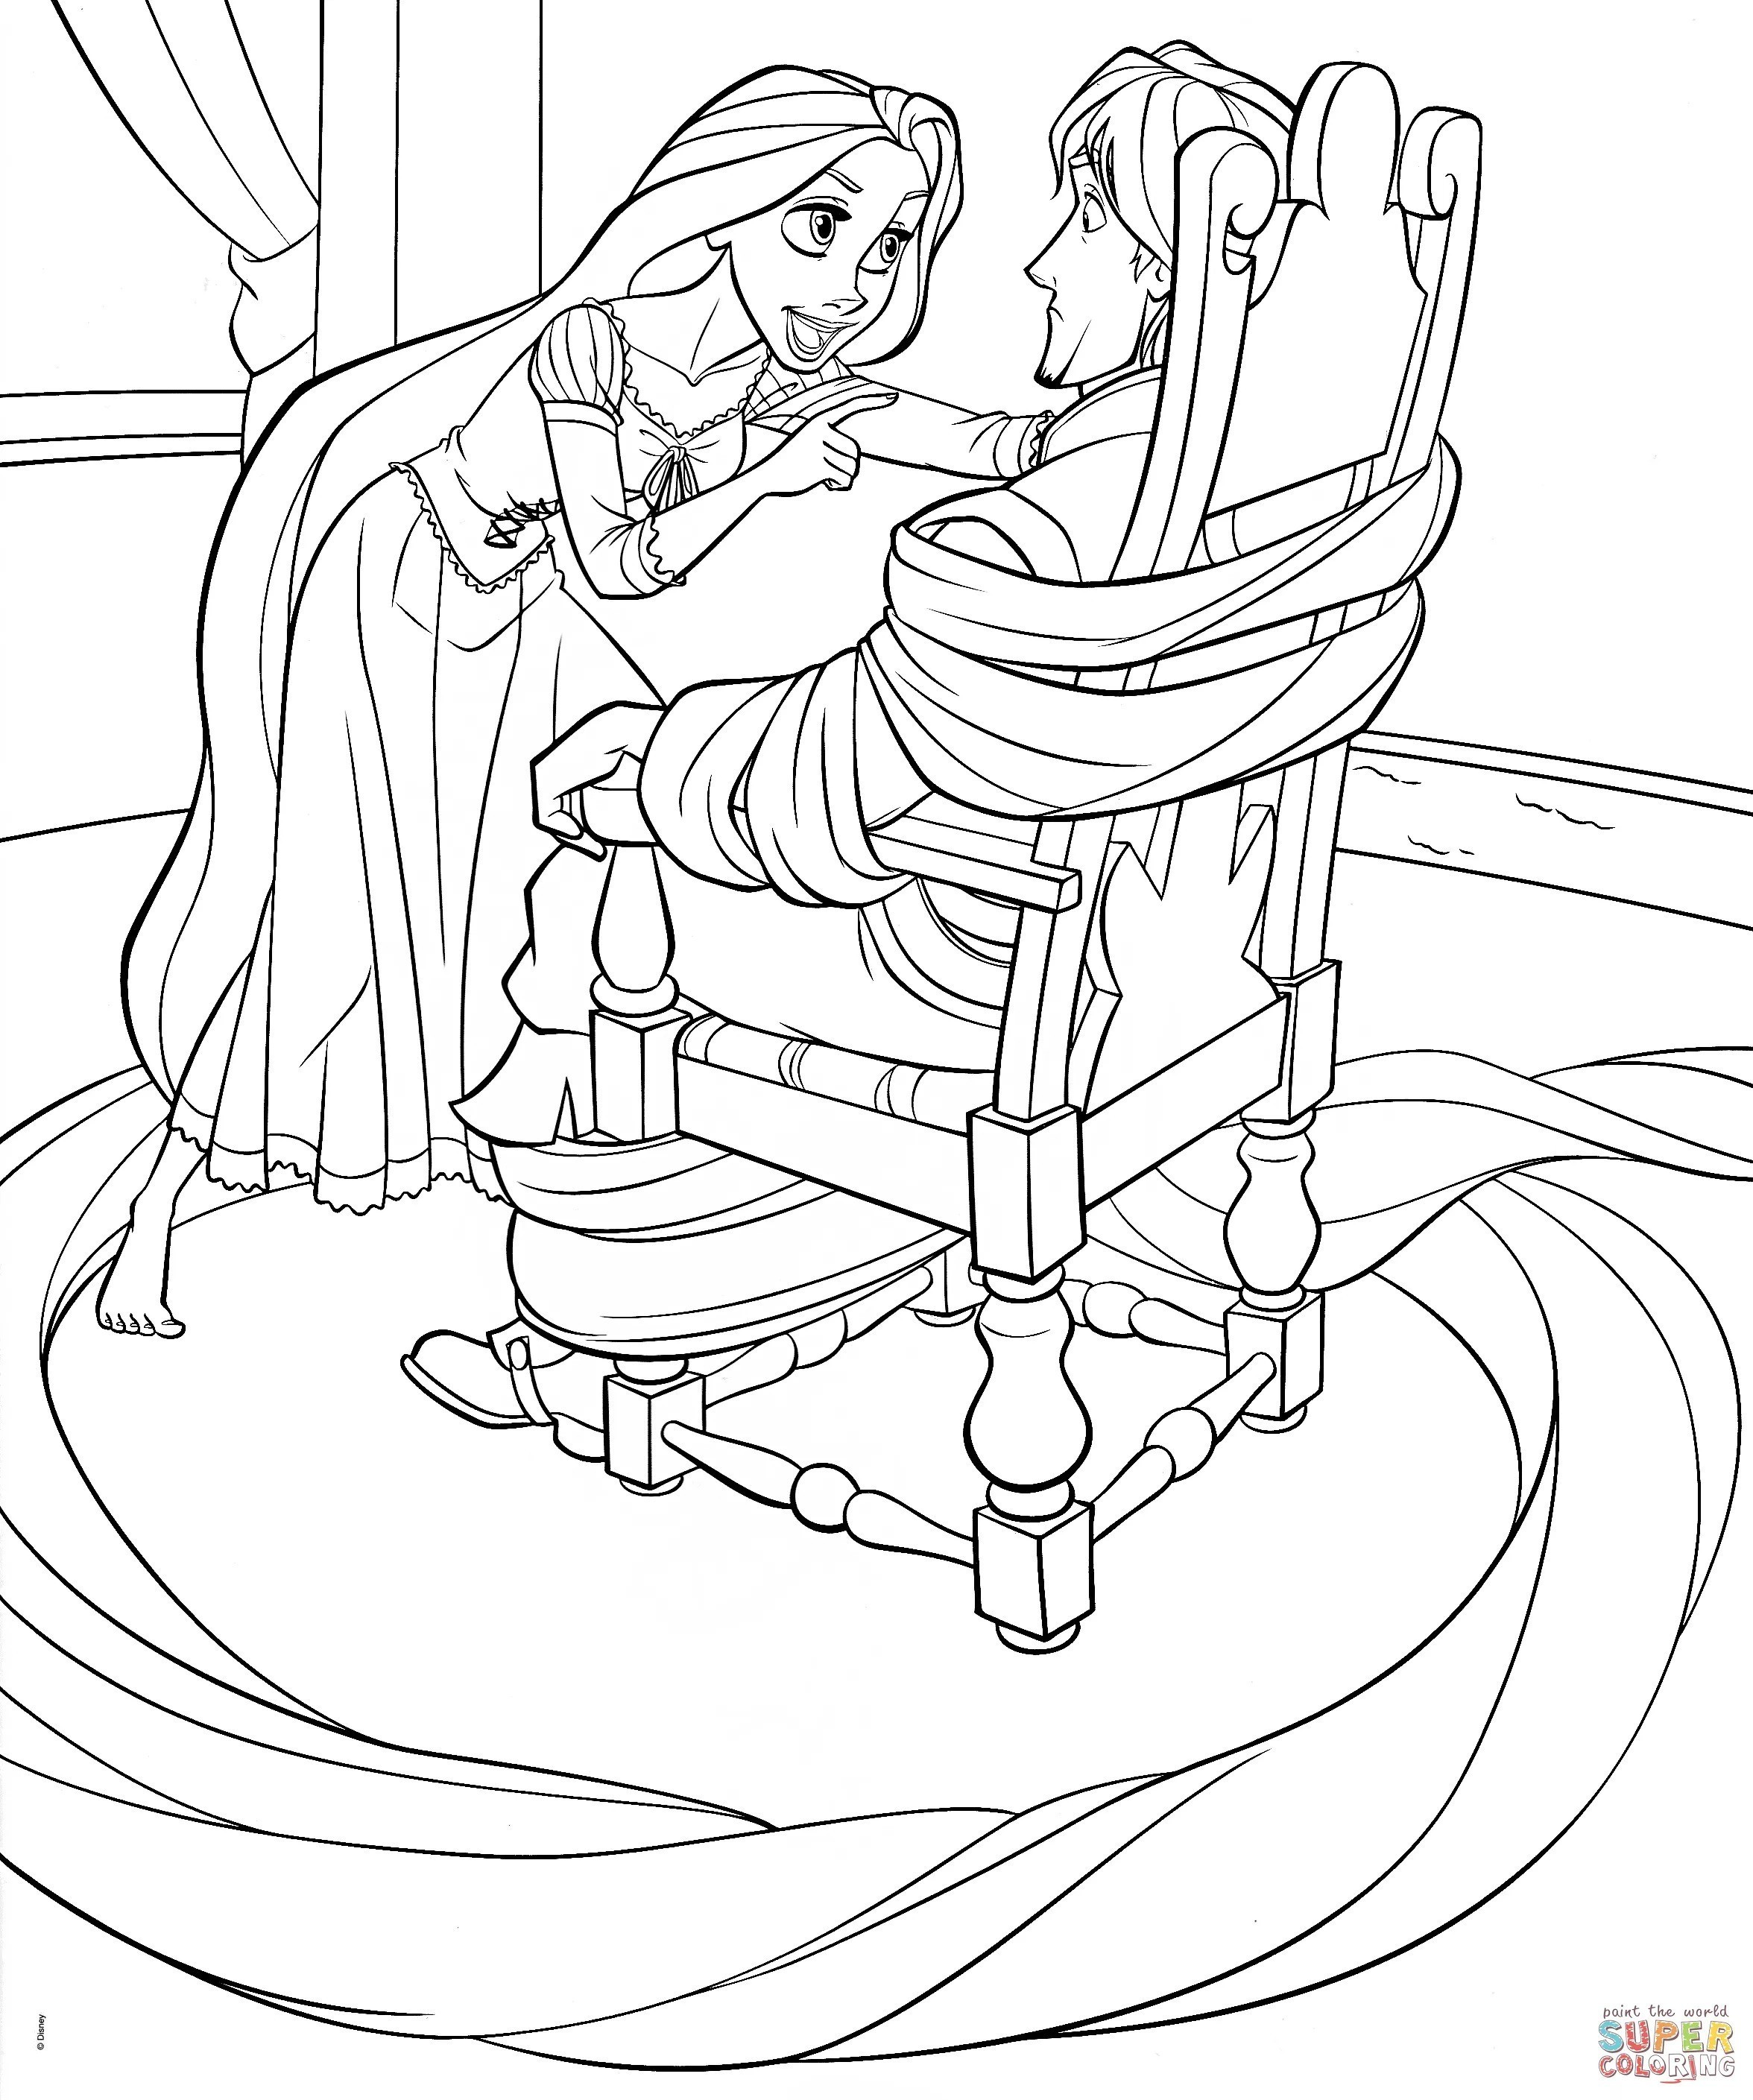 disney-princess-coloring-pages-rapunzel-and-flynn-of-disney-princess-coloring-pages-rapunzel-and-flynn Disney Princess Coloring Pages Rapunzel and Flynn Cartoon 